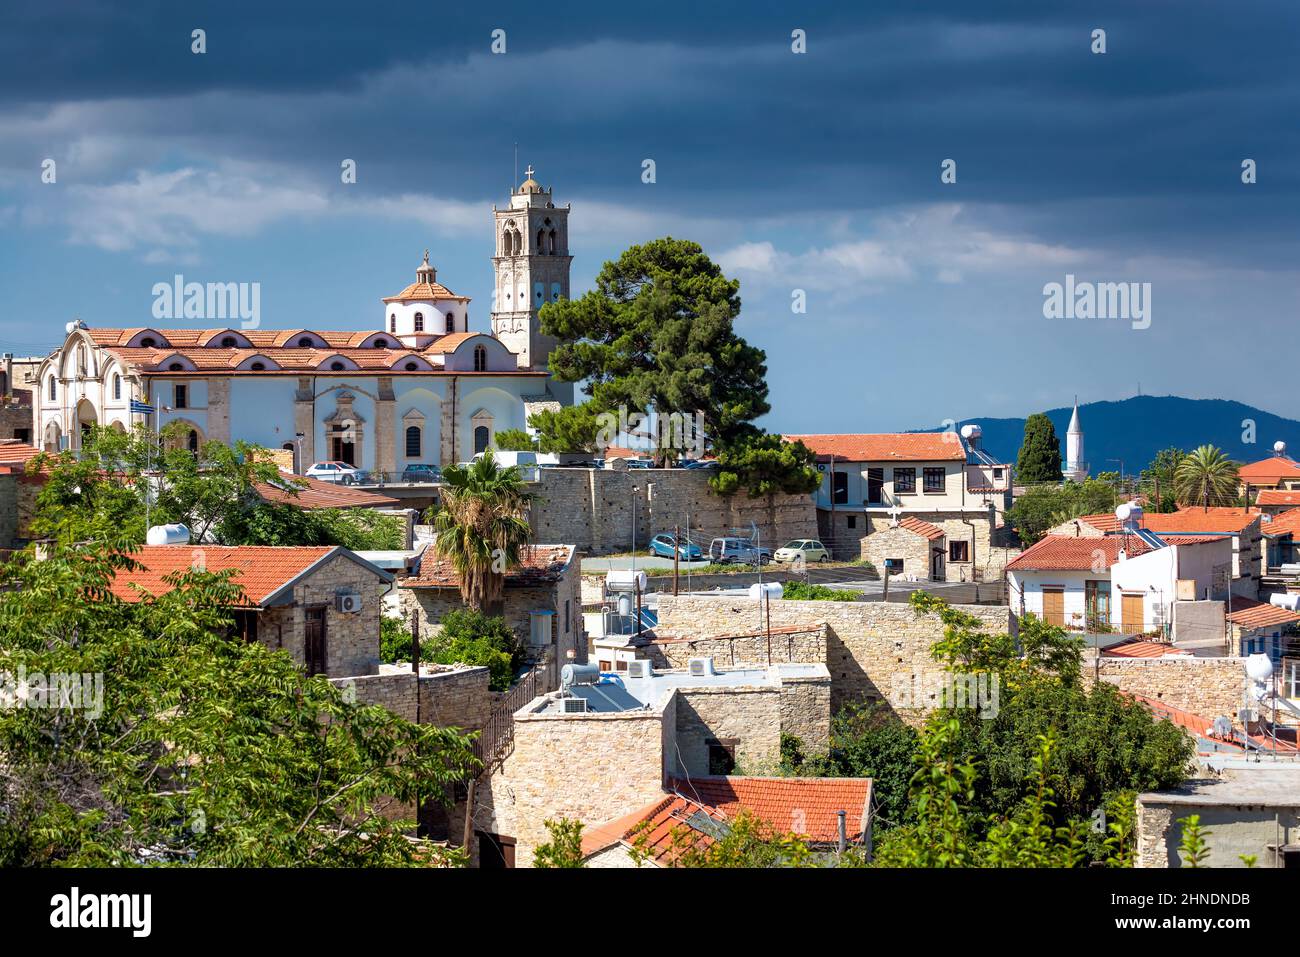 Lefkara village in Cyprus with Timios Stavros church Stock Photo